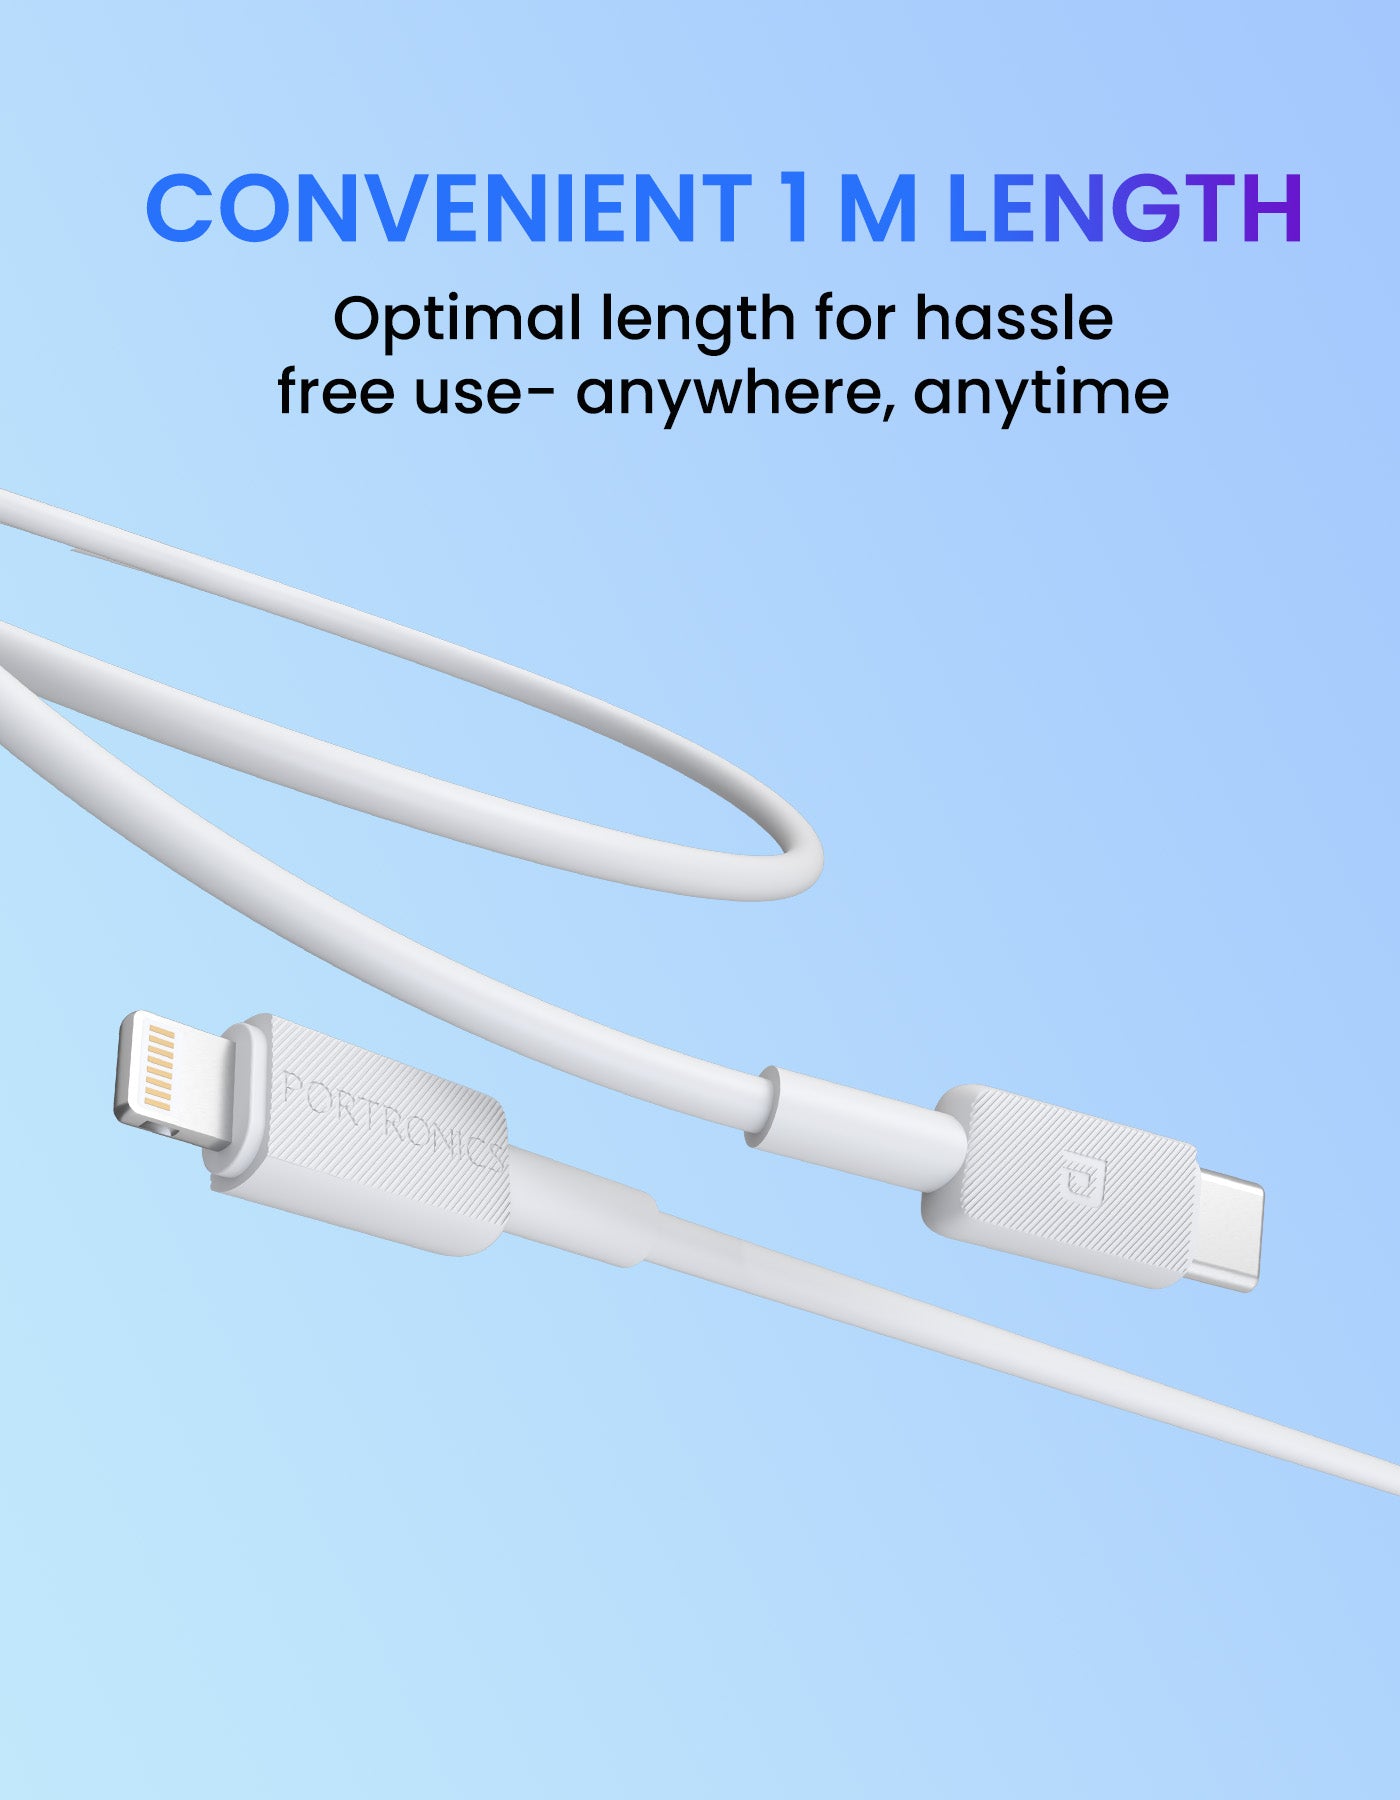 Konnect Link CL 27w Type C to 8 pin fast charging cable with 1M lengths